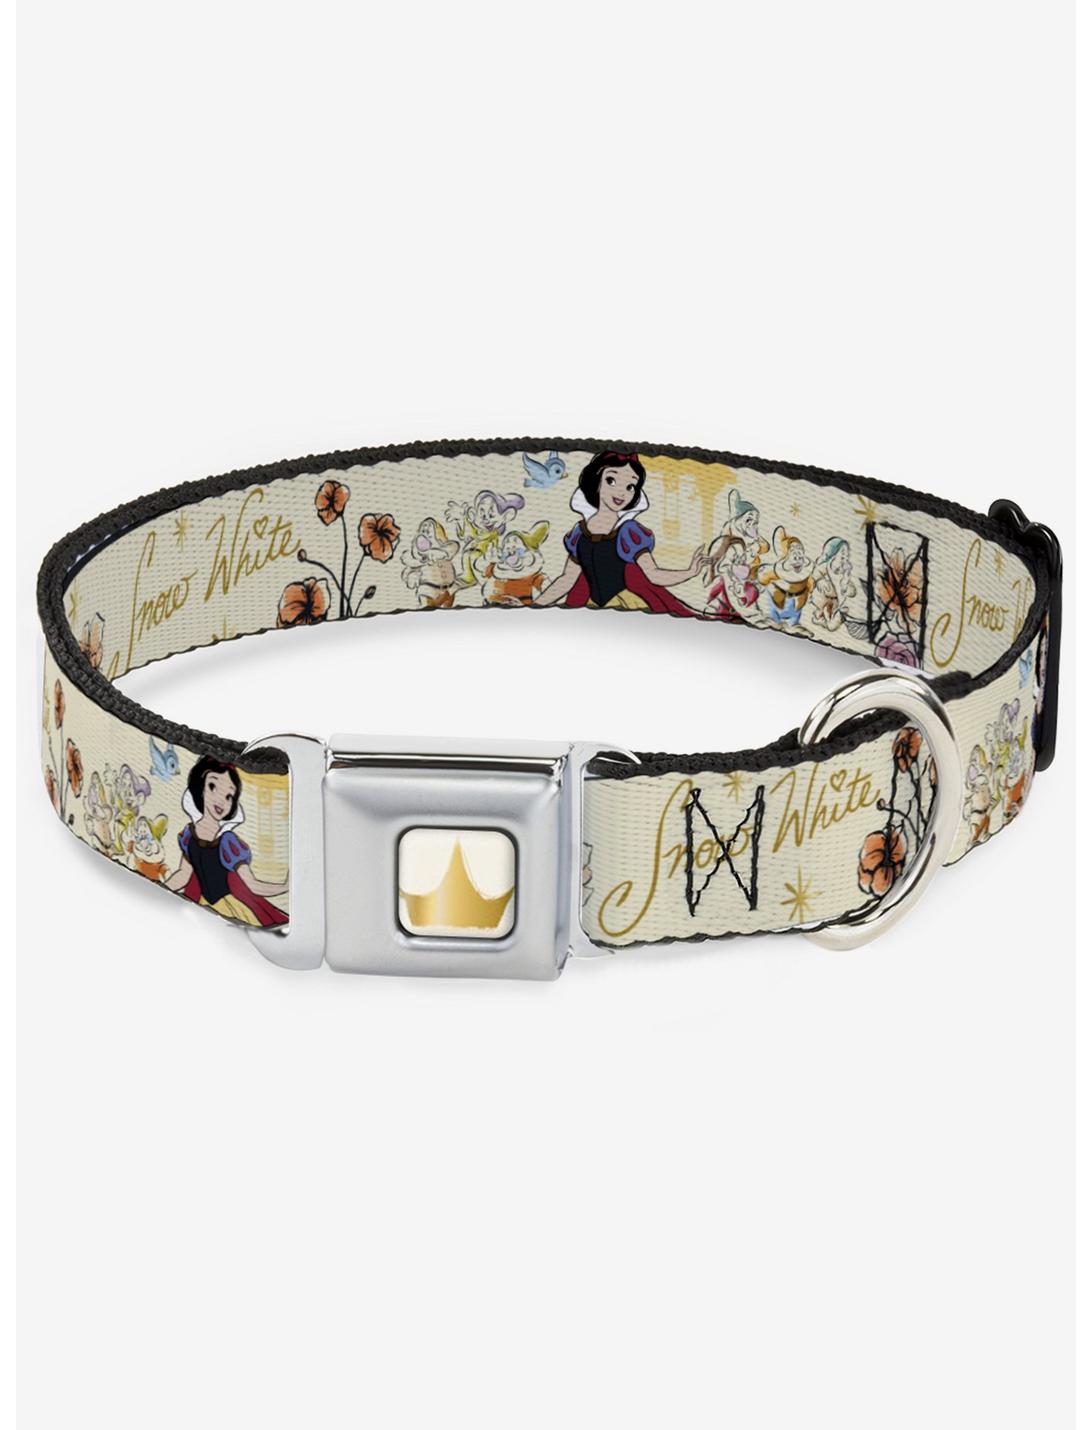 Disney Snow White And The Seven Dwarfs With Script And Flowers Seatbelt Buckle Pet Collar, MULTI, hi-res